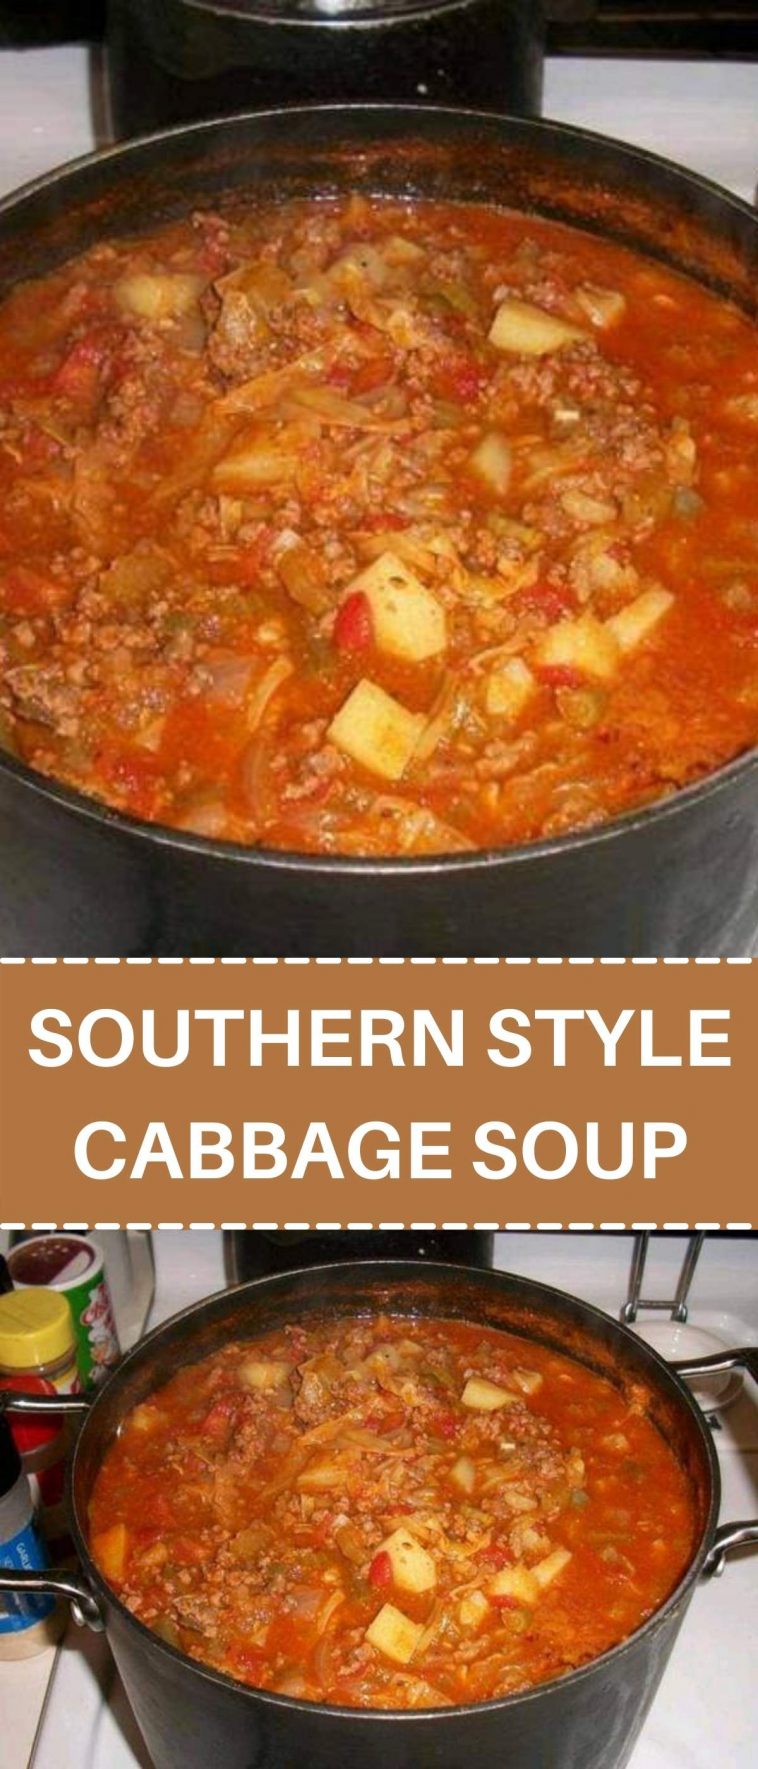 SOUTHERN STYLE CABBAGE SOUP